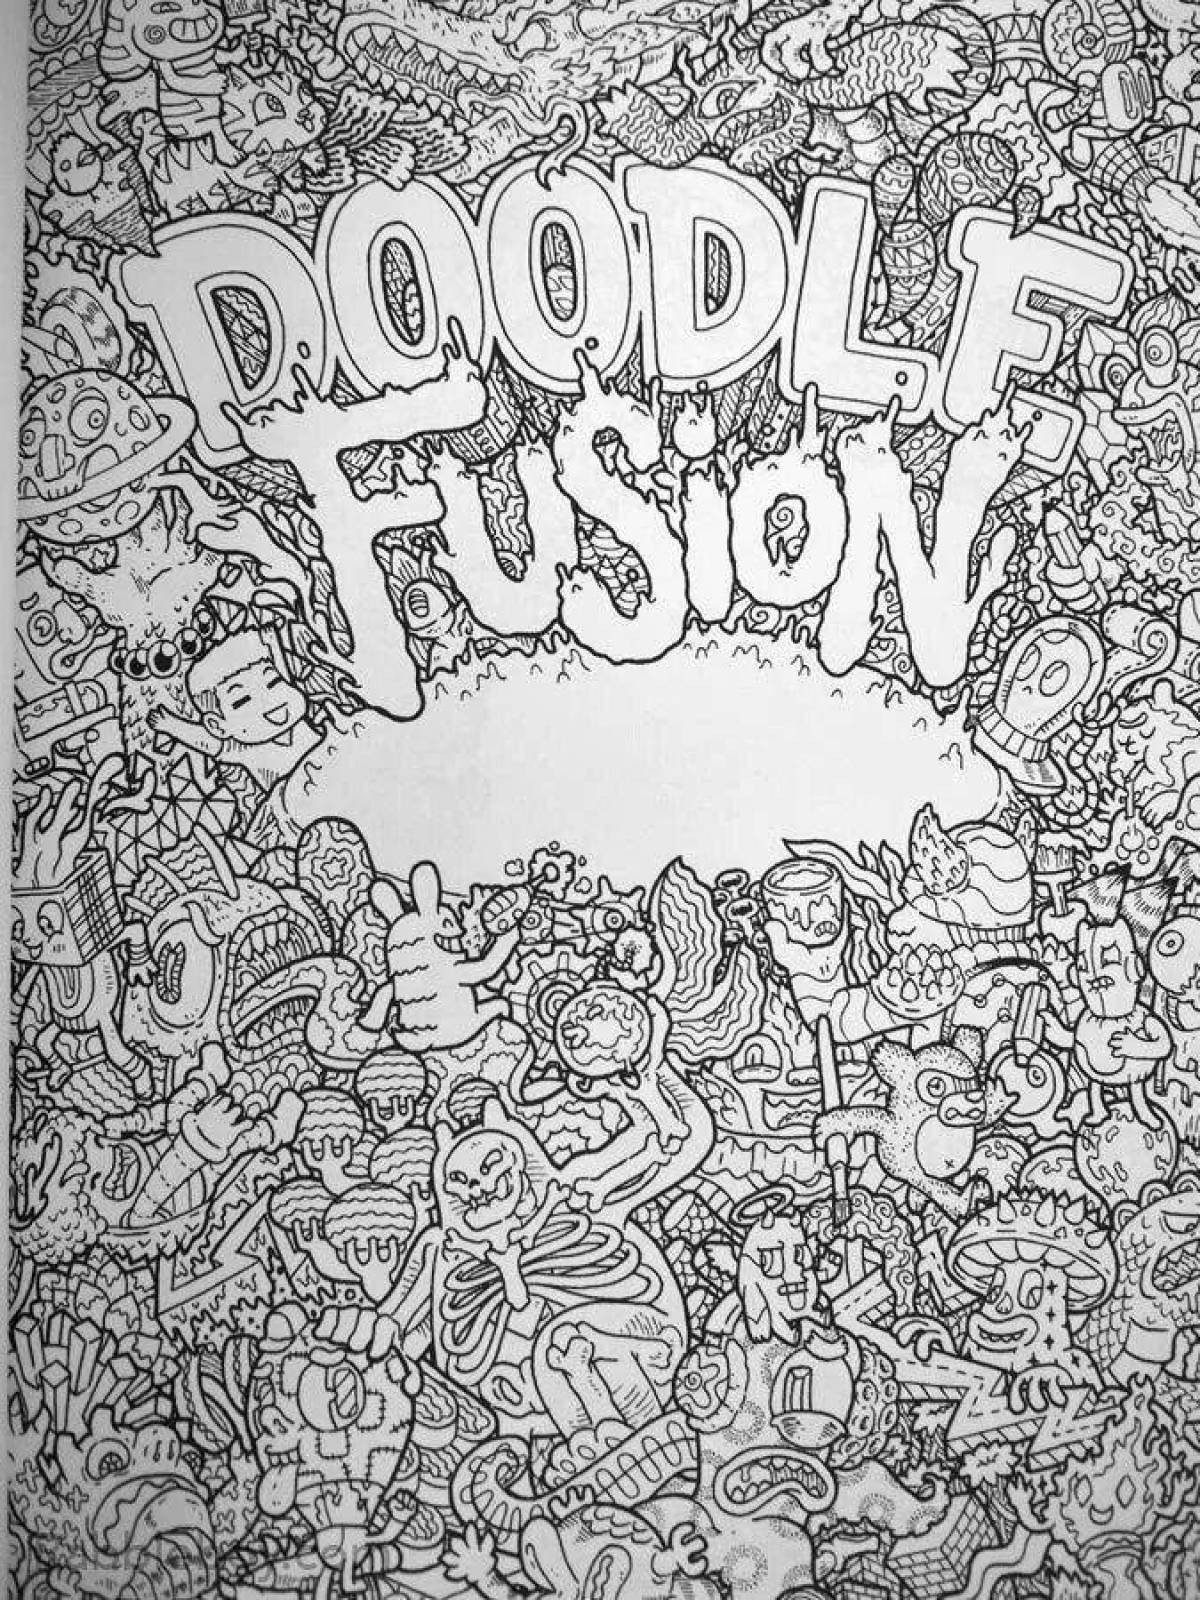 Color-explosion coloring page doodle commotion